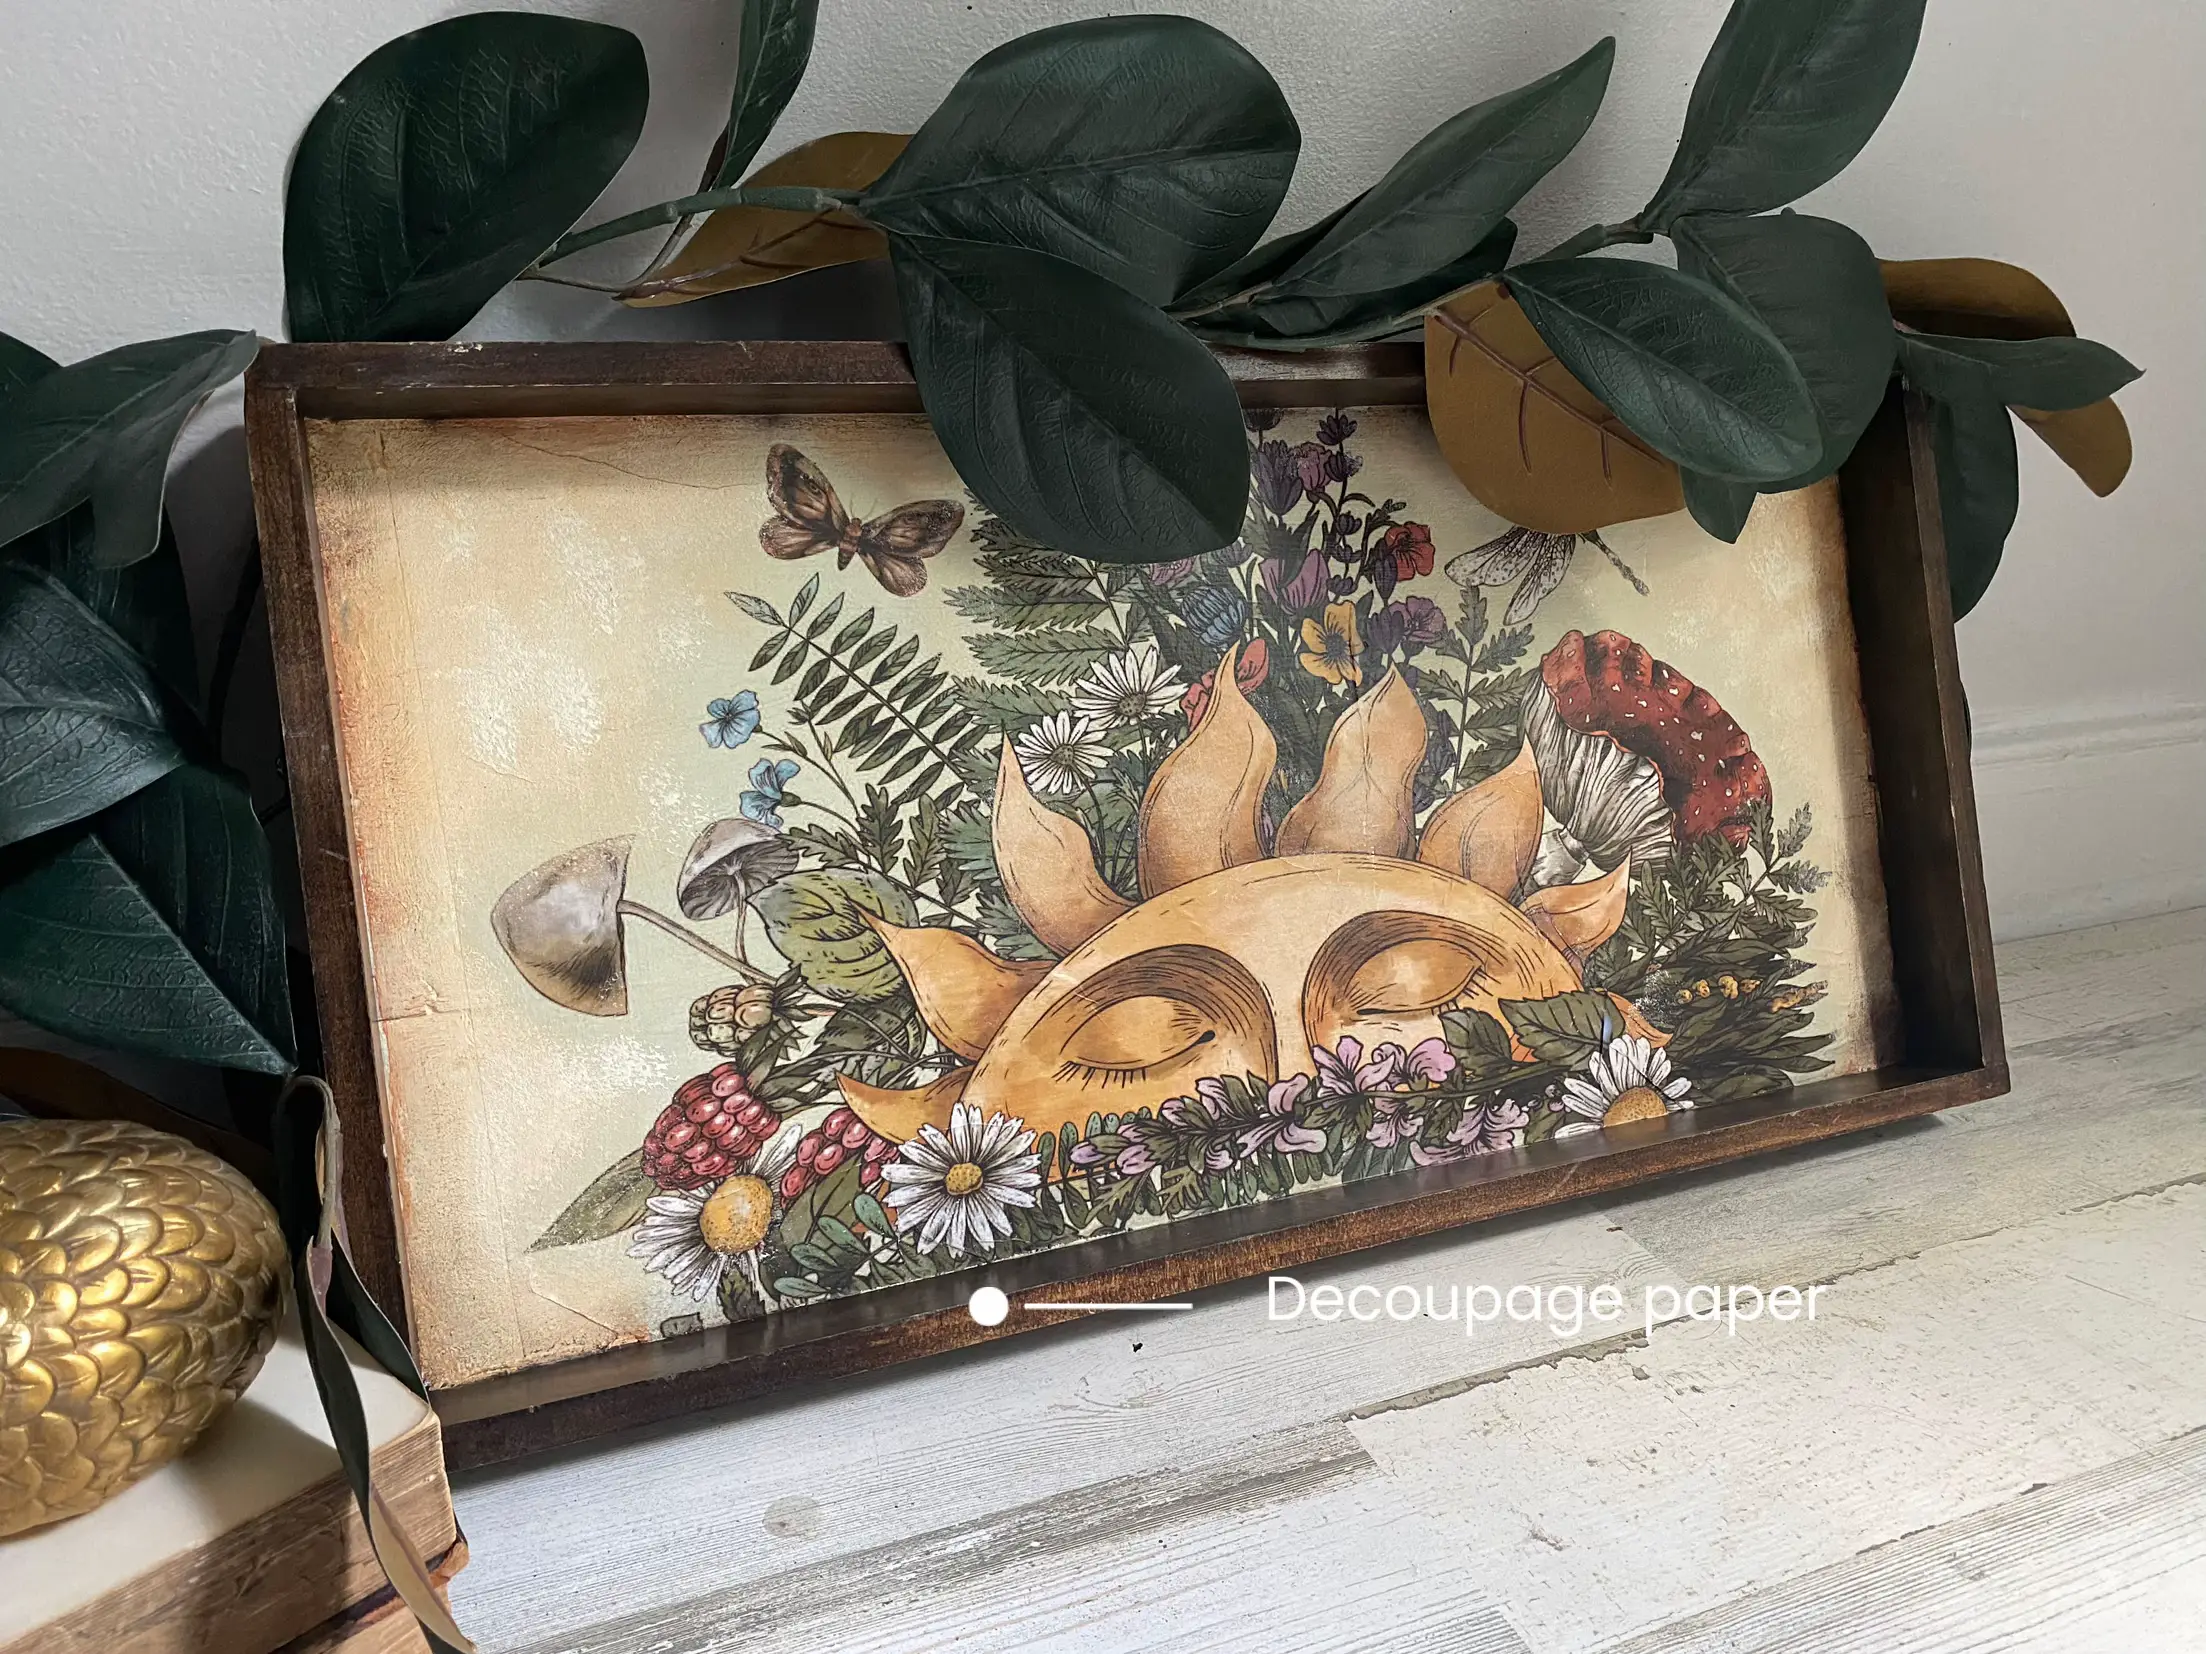 What Is Decoupage Art? A Guide to Decoupage Art - The Art of Paper  Transformation